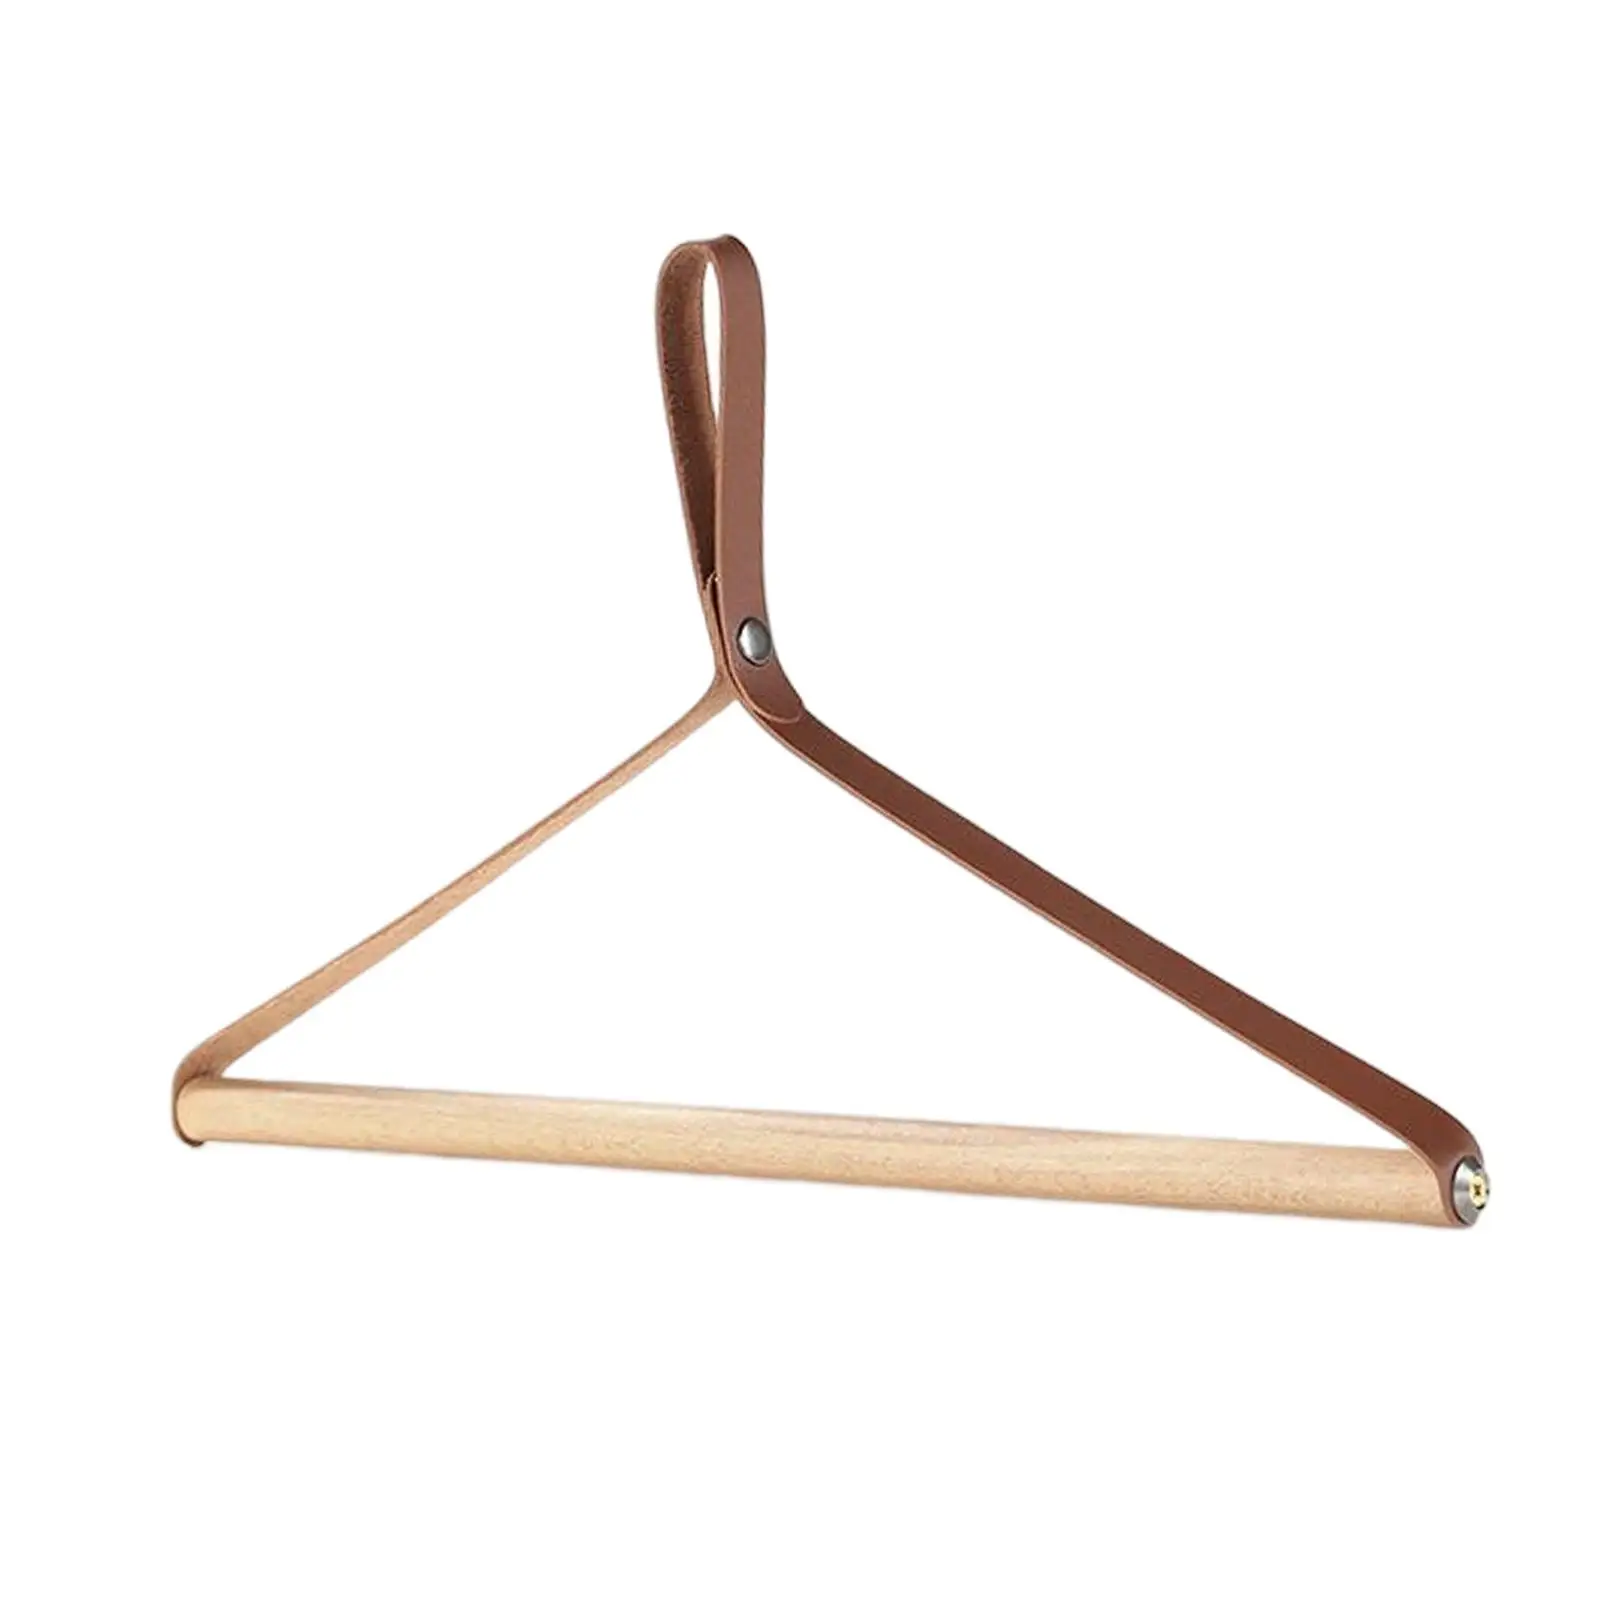 Wooden Folding Hanger Clothing Drying Rack Coat Hanger Lightweight Foldable PU Leather Hanger for Camping Indoor Outdoor Travel